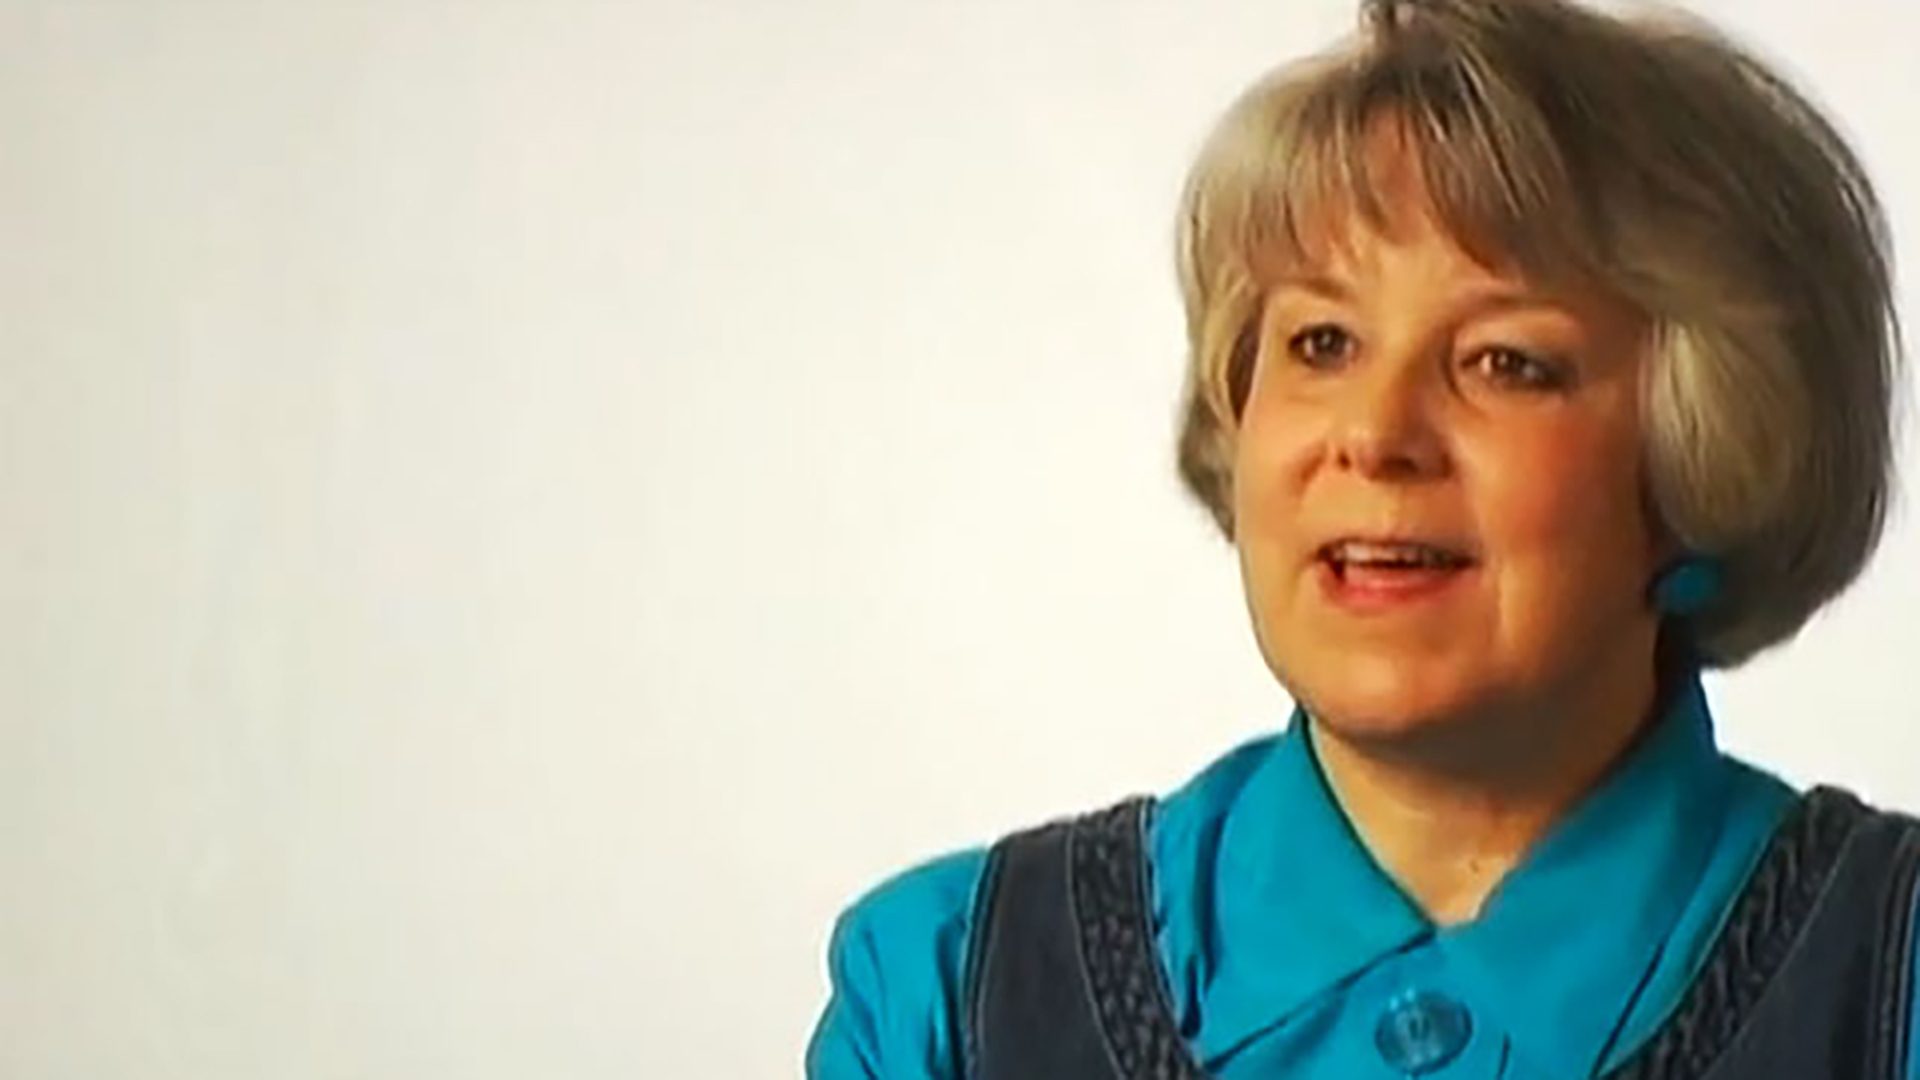 A senior woman wearing a teal shirt is interviewed against a white background.